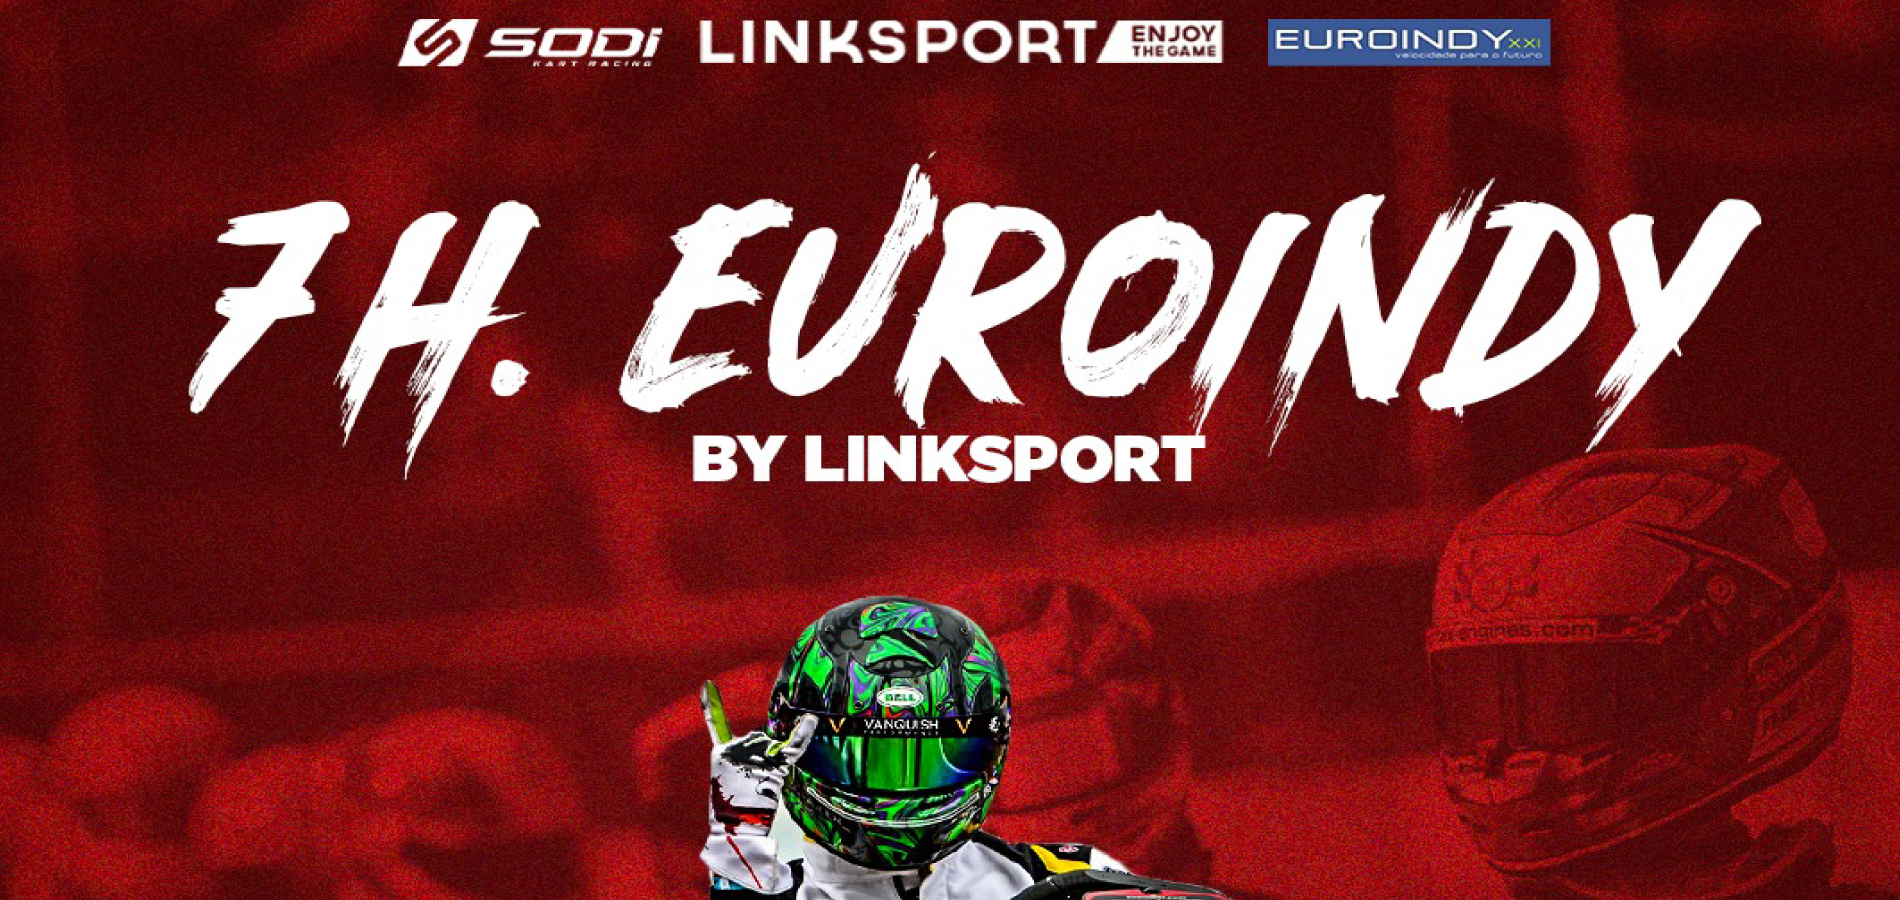 7H EUROINDY BY LINKSPORT